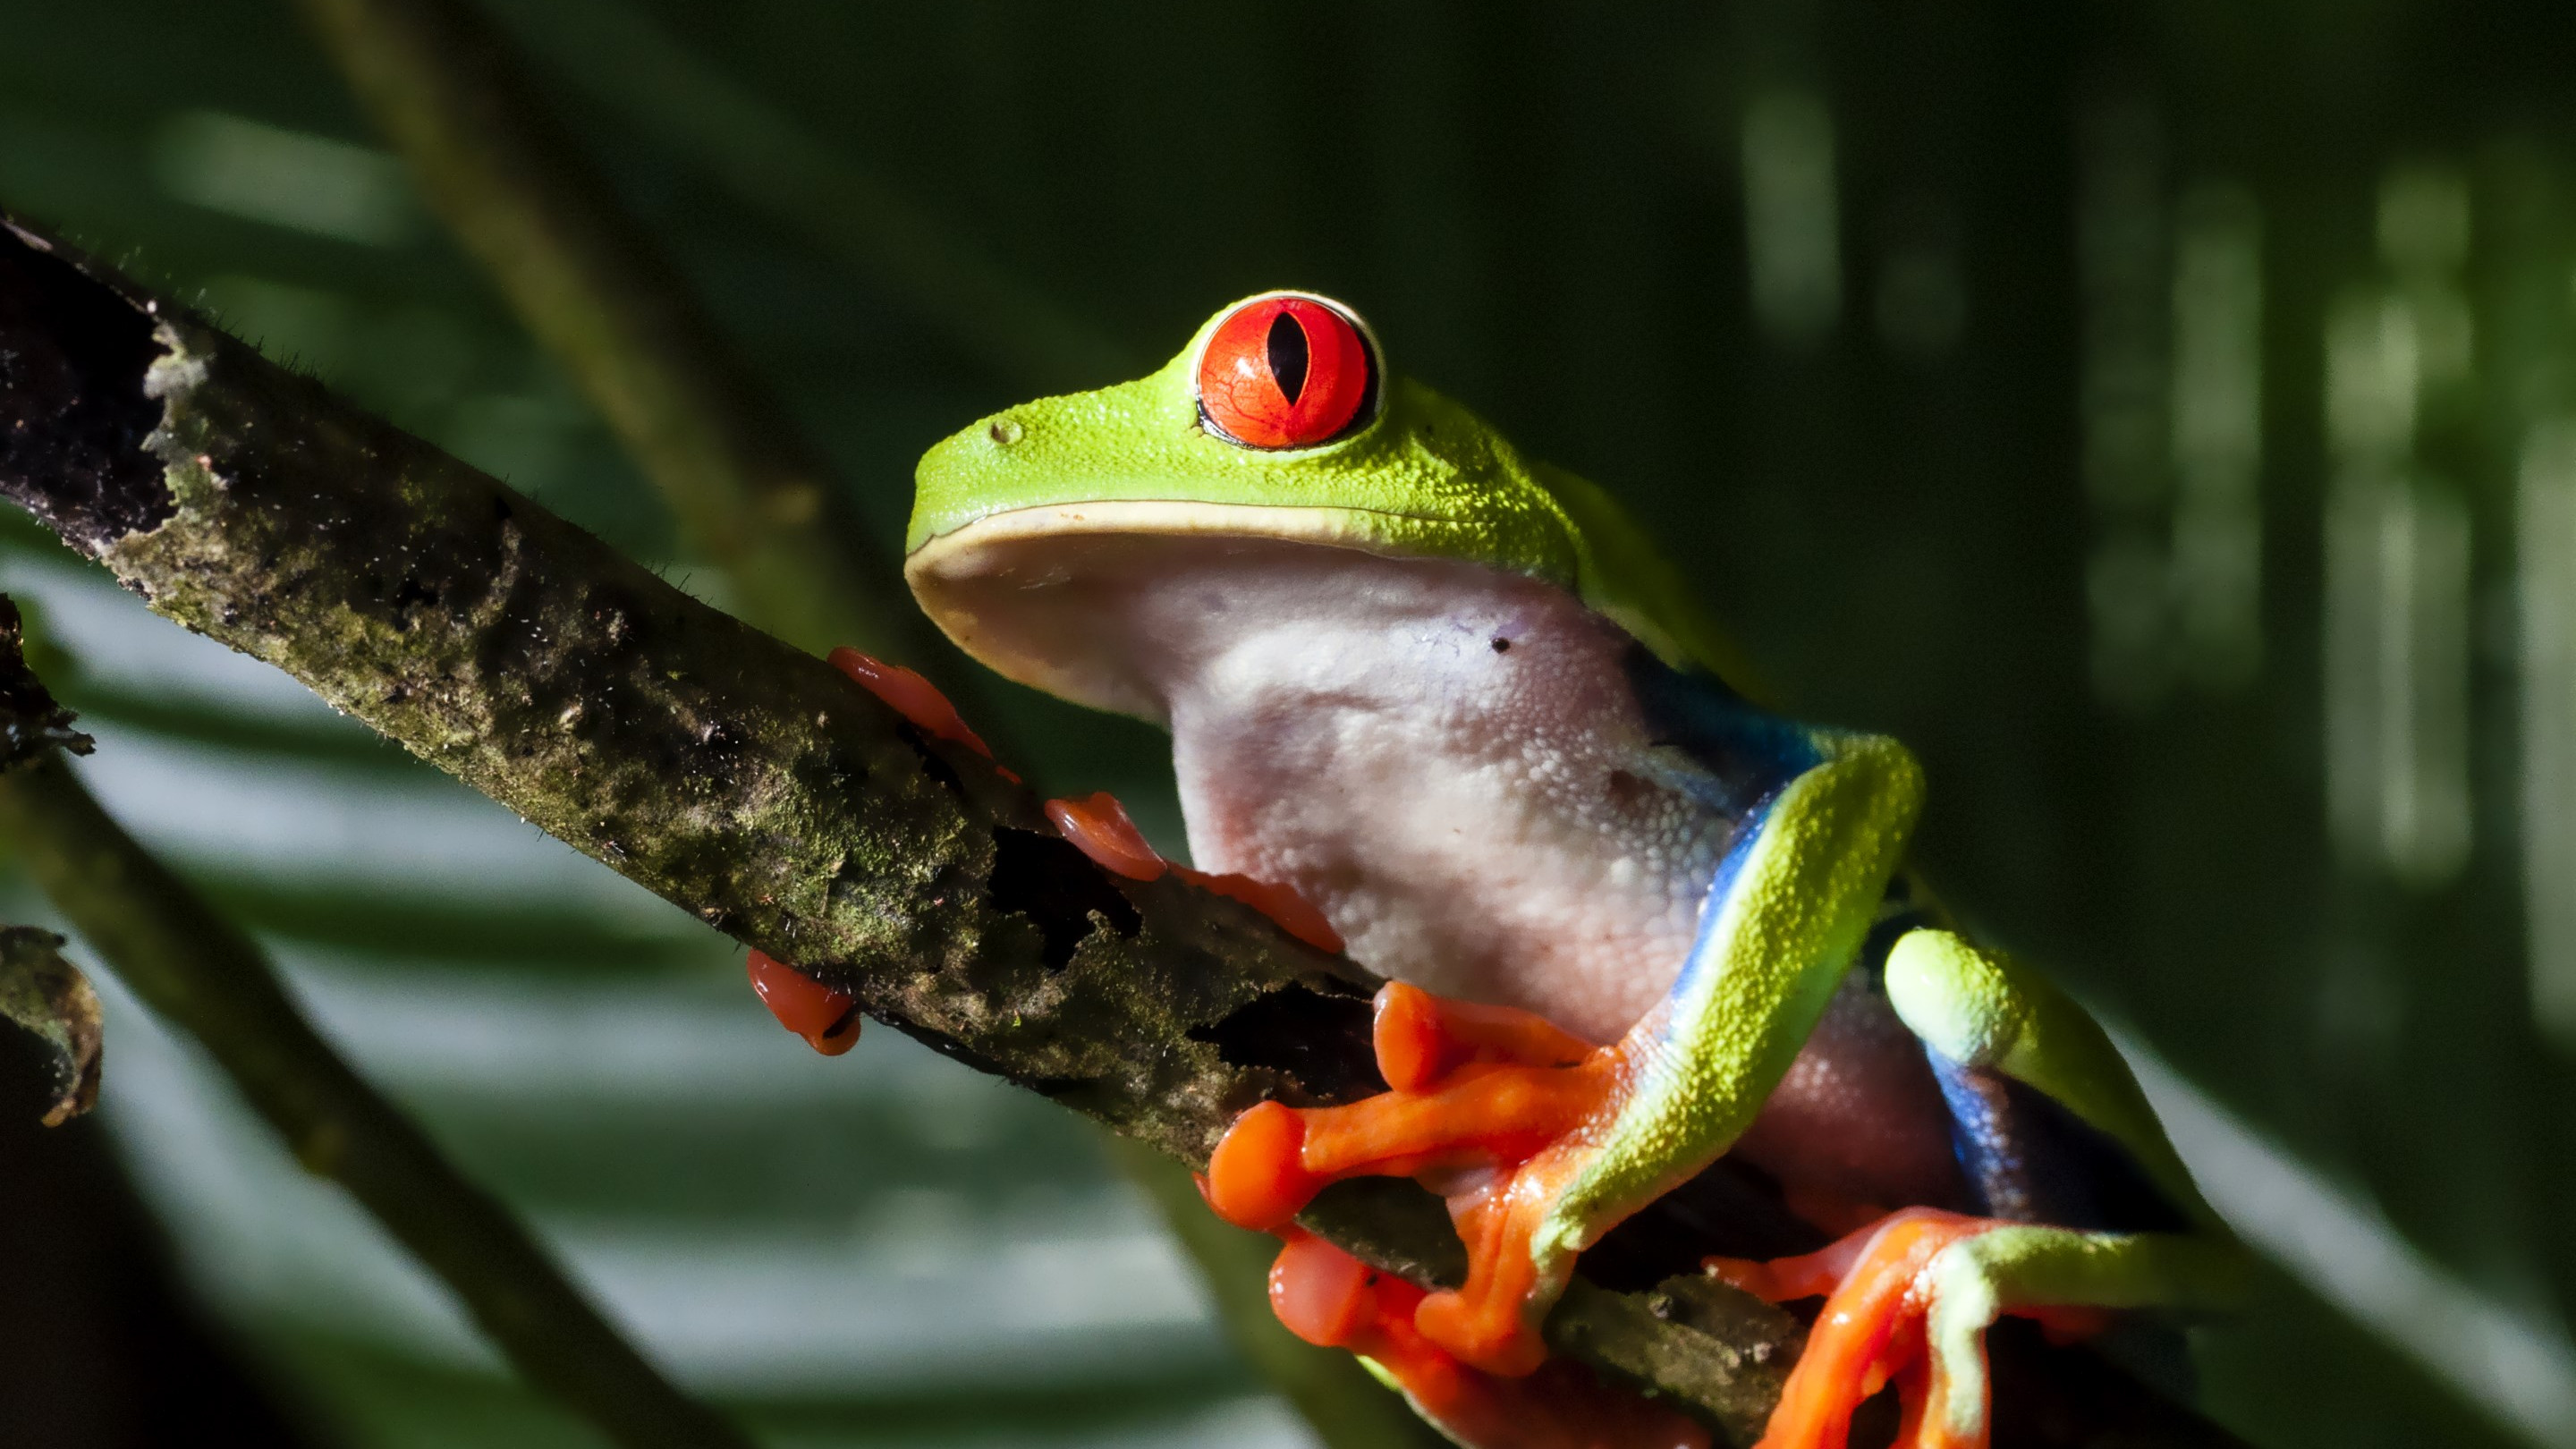 Red eyed tree frog wallpaper 2880x1620